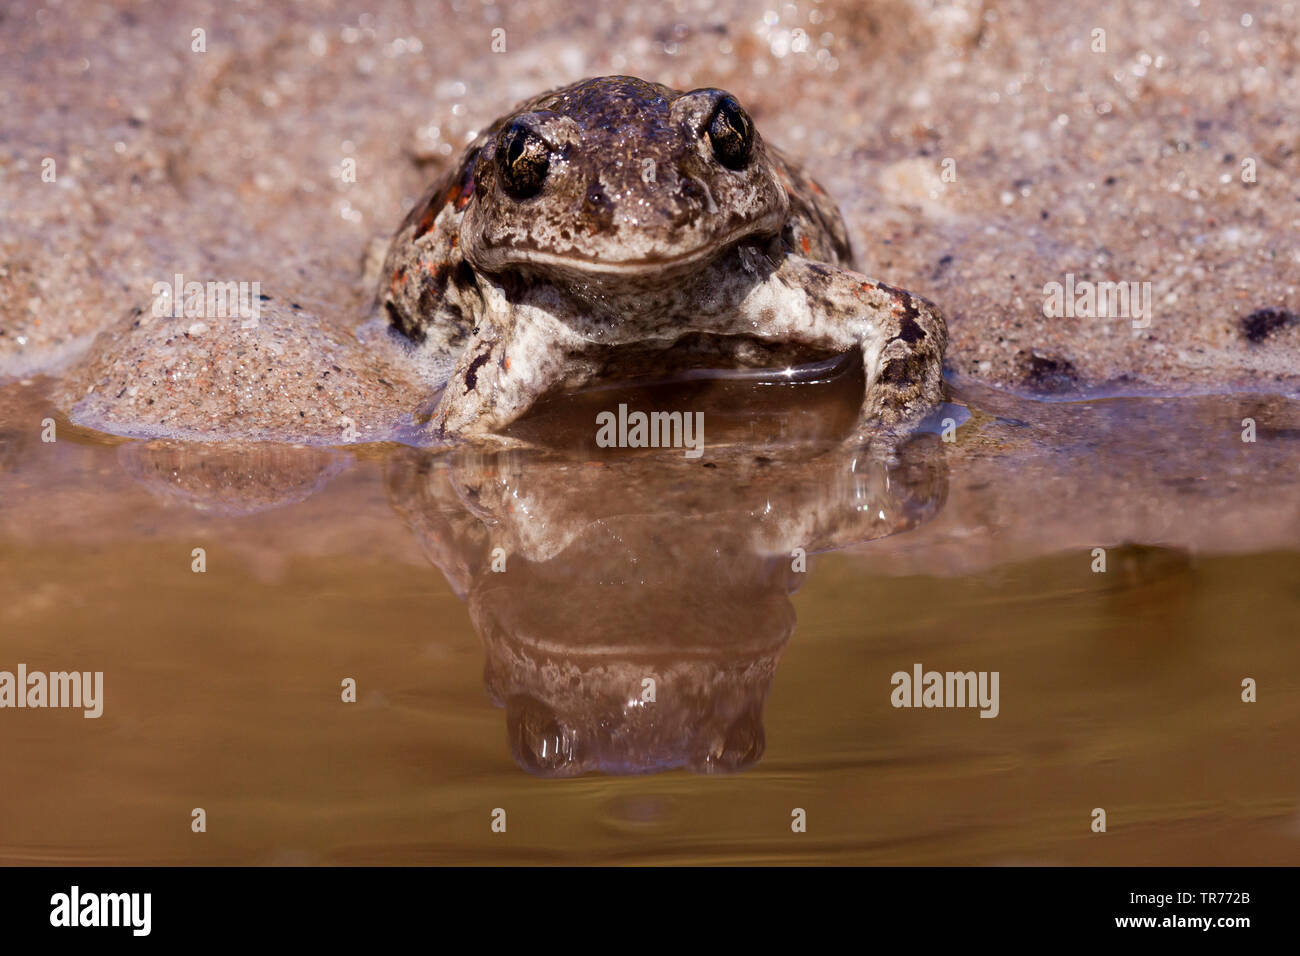 common spadefoot, garlic toad (Pelobates fuscus), sitting at the edge of the water, Netherlands Stock Photo